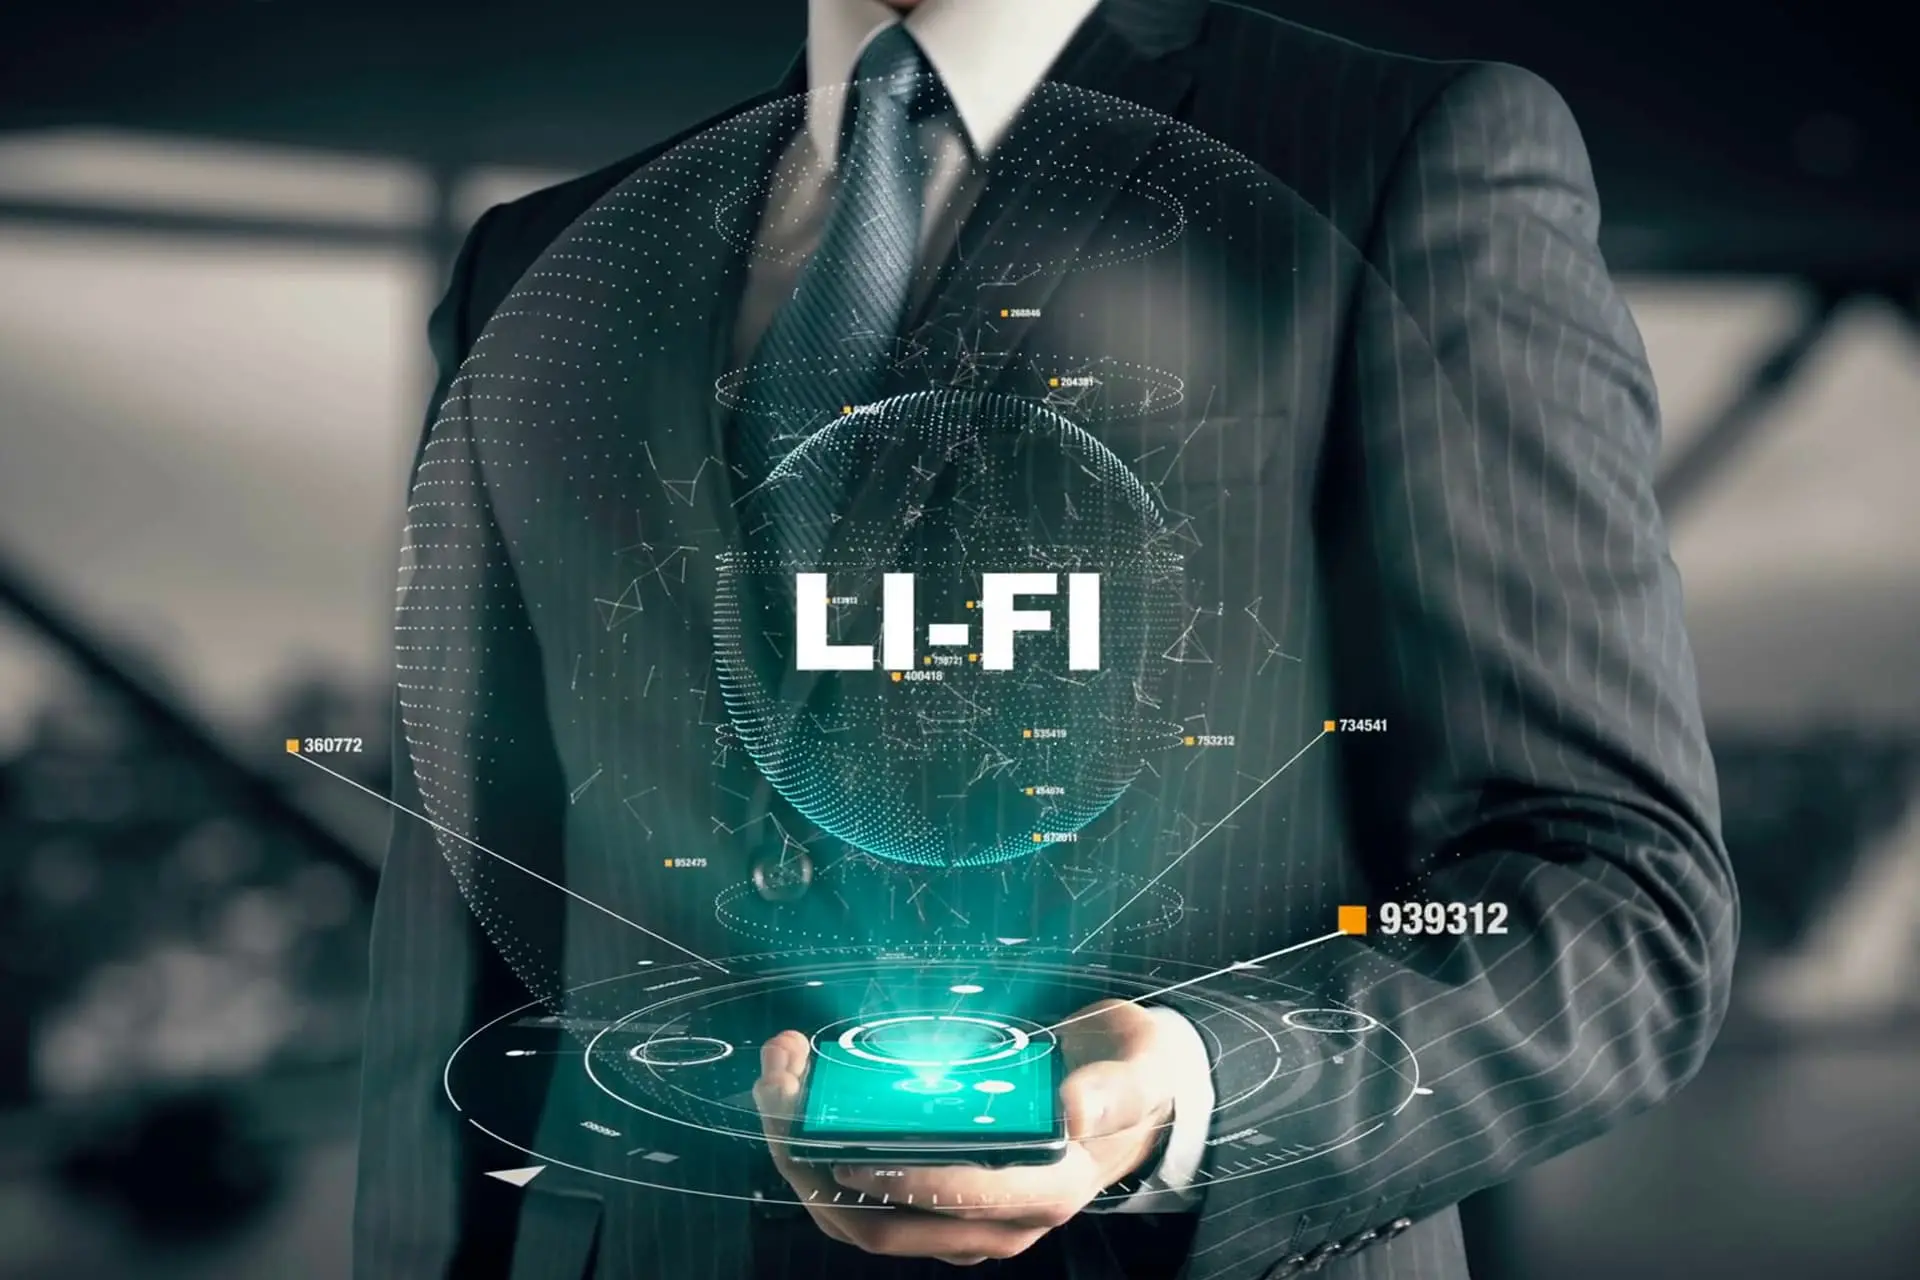 Forget Wi-Fi; "Li-Fi" Is Coming With 100 Times Faster Speed!